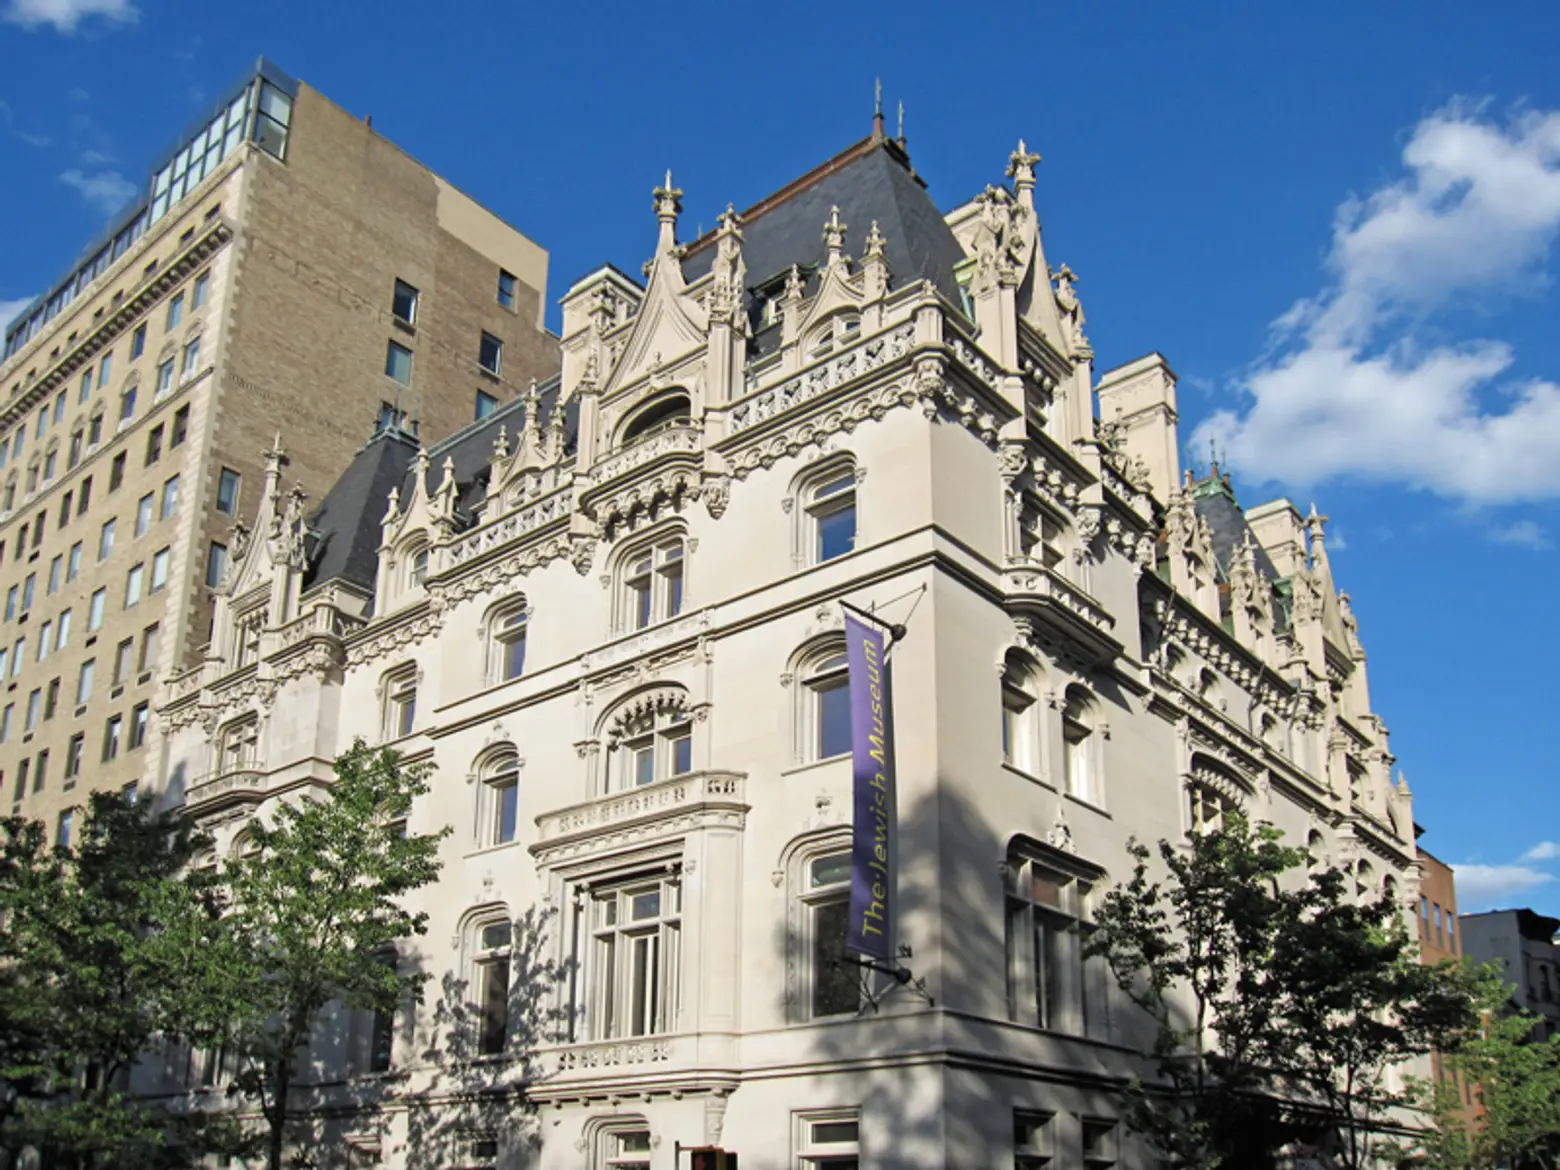 A view of the Felix Warburg Mansion, now the Jewish Museum of New York.